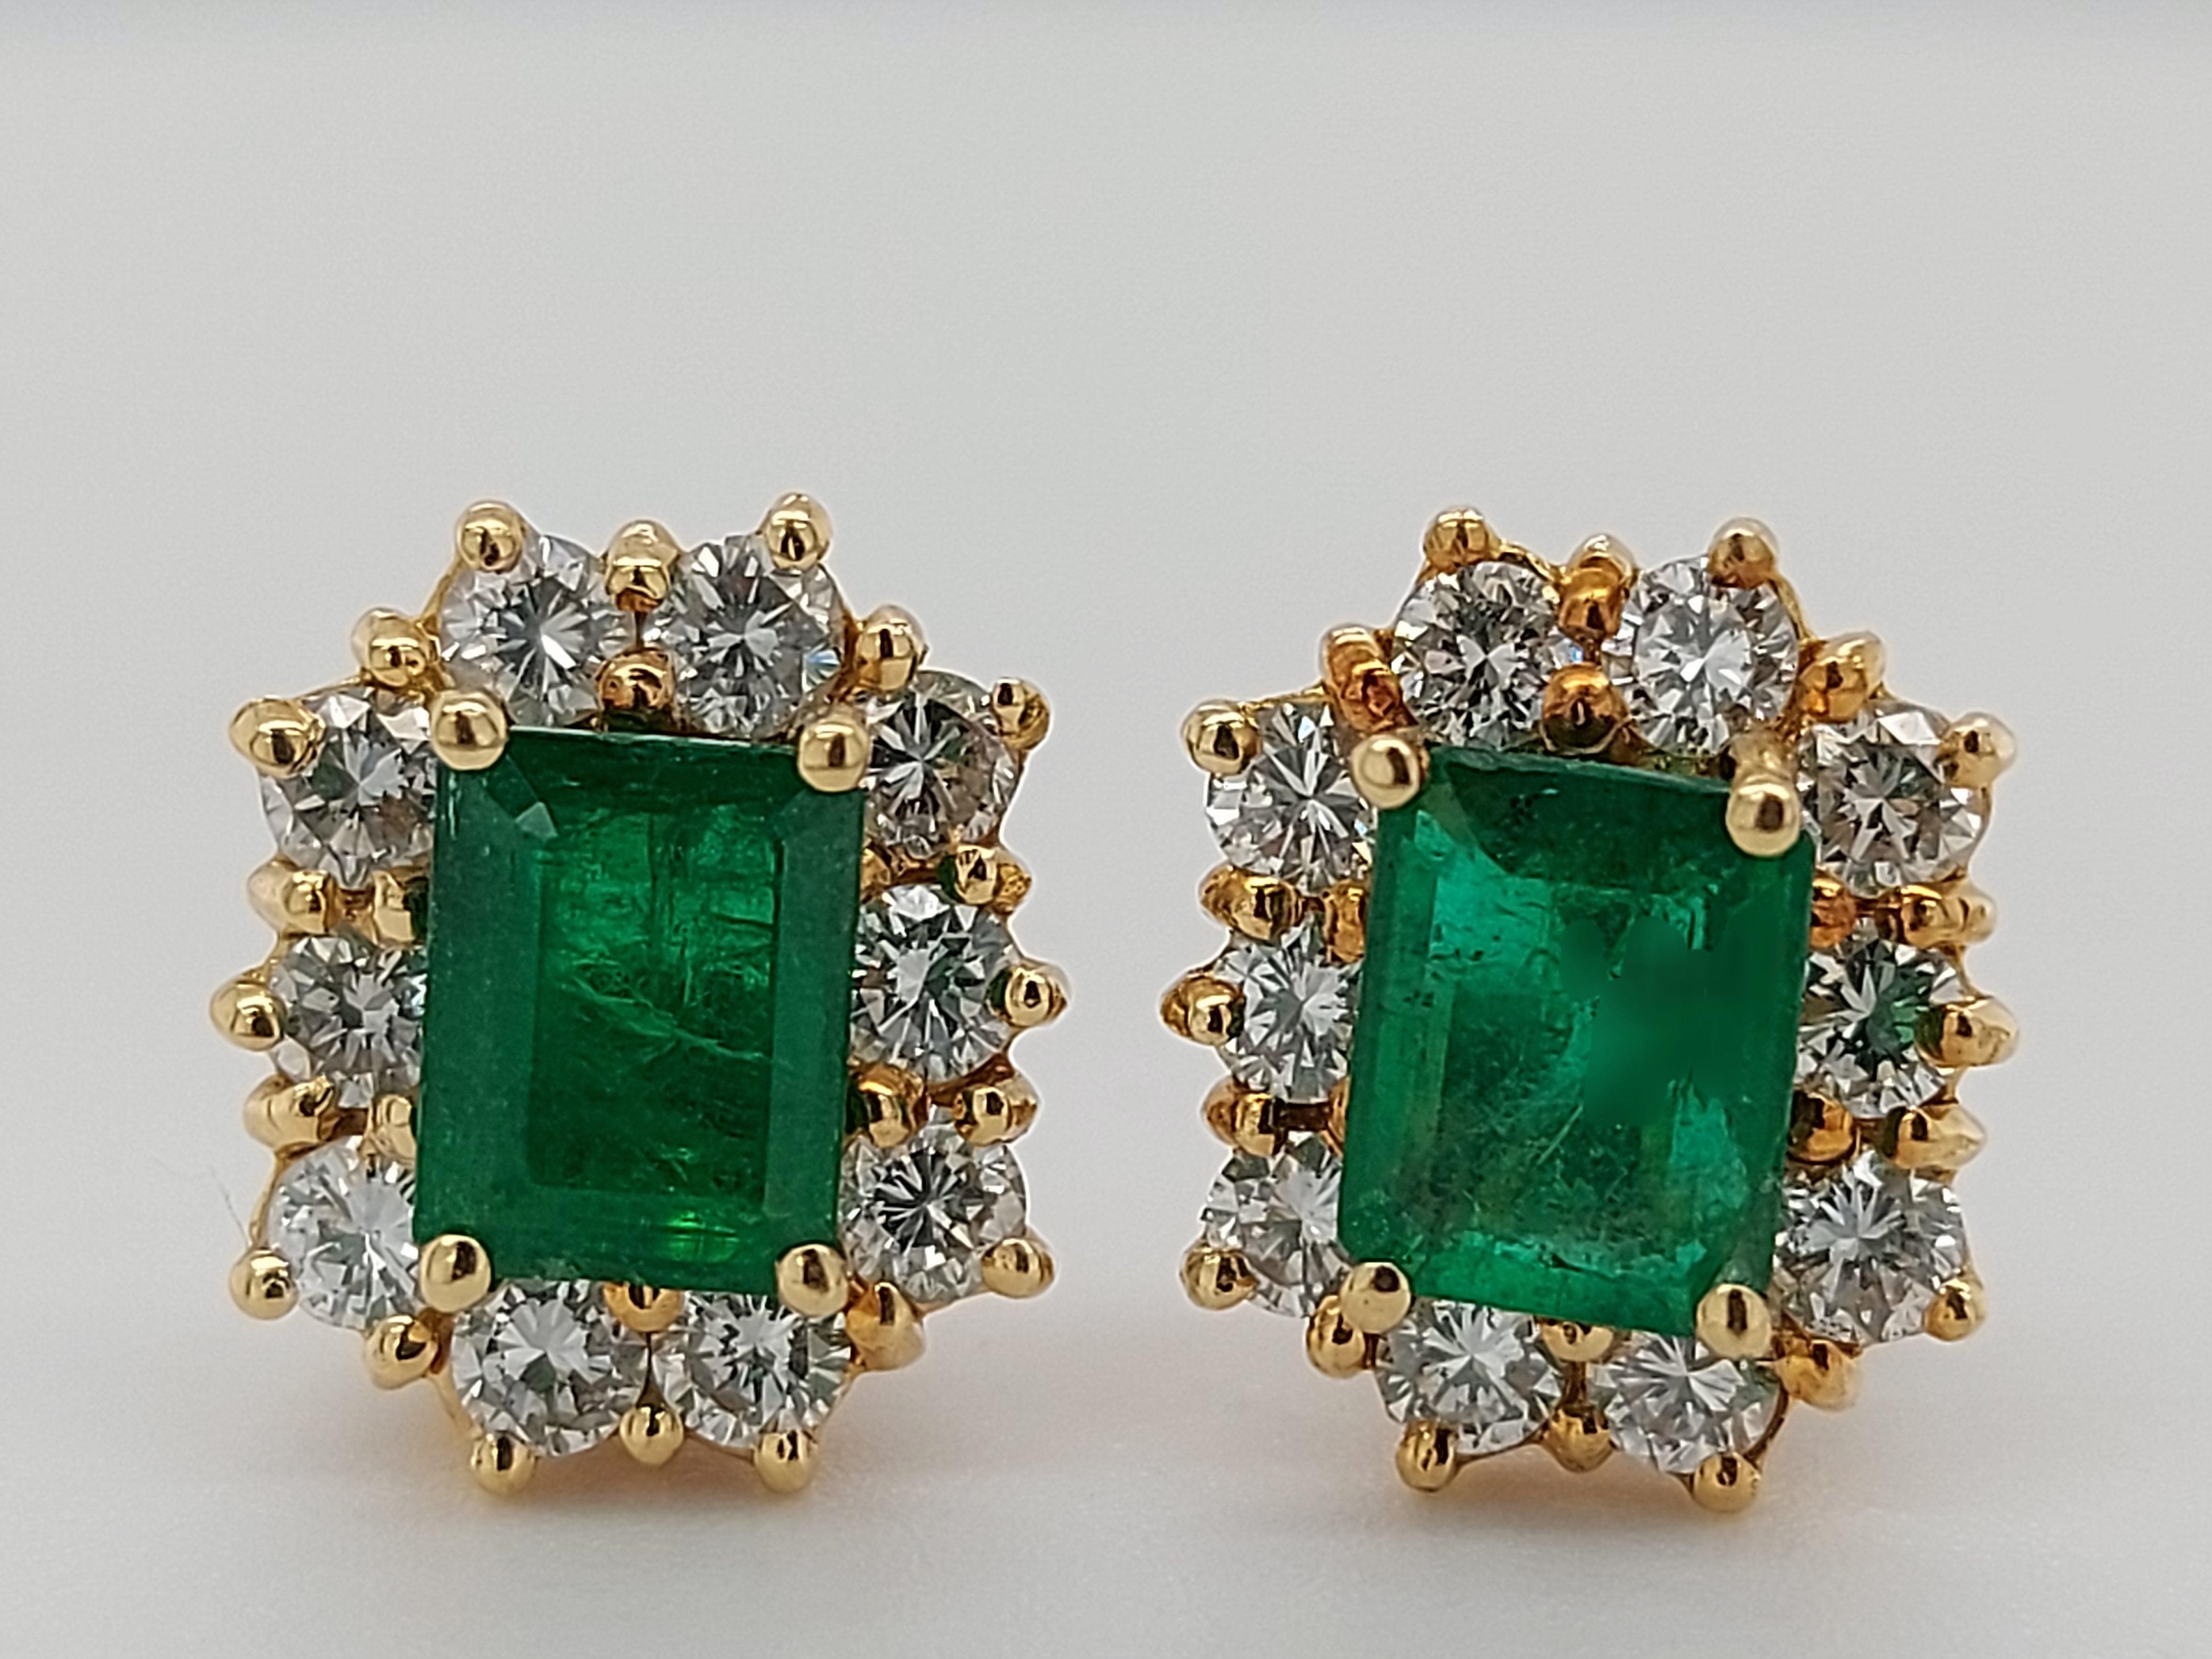 Stunning 18kt Gold Emerald  Earrings with Diamonds

Emerald: dimensions emerald: 5.2 mm x 6.7 mm, Ca.1,2  Ct Each

Diamonds: 20 brilliant cut diamonds, Ca. 1 Ct

Material: 18 kt yellow gold

Total weight: 3.6 gram / 0.125 oz / 2.3 dwt

Measurements: